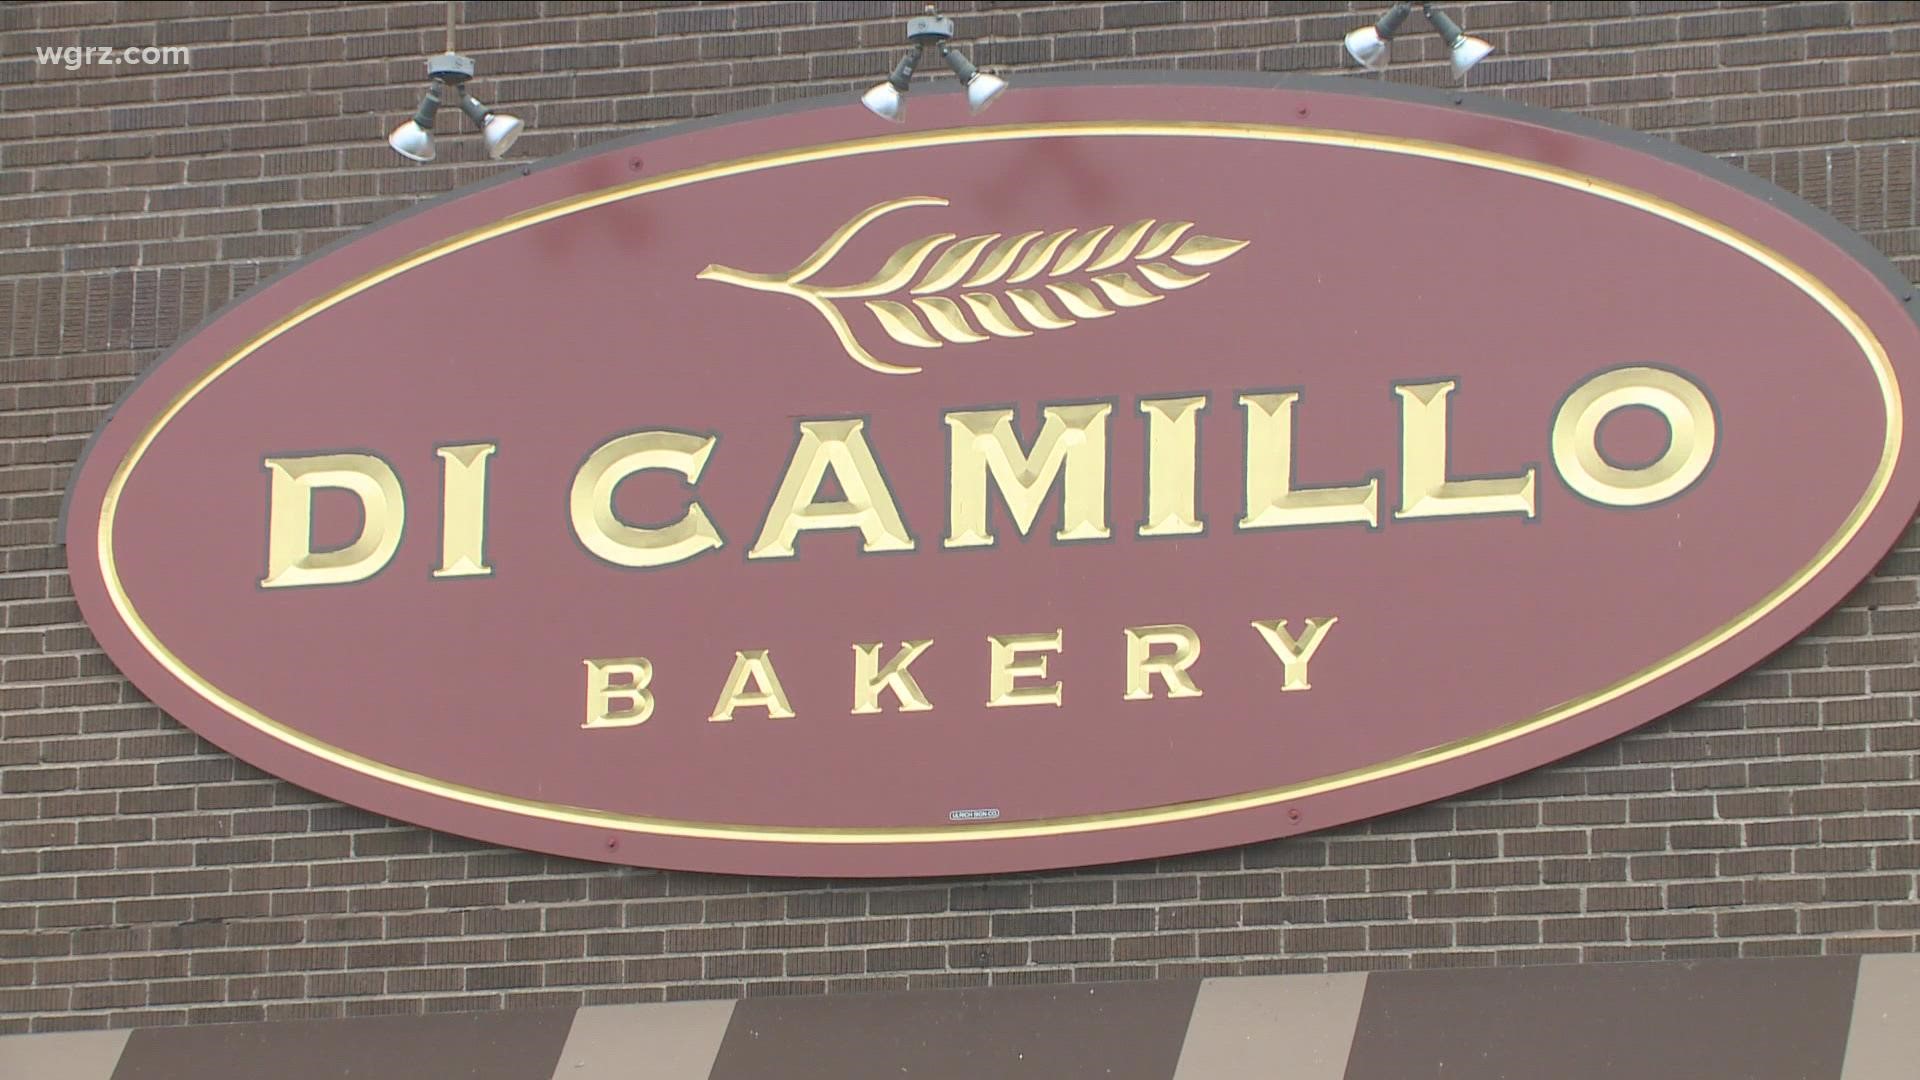 The Dicamillo family announced they are closing its door until further notice after it was robbed.